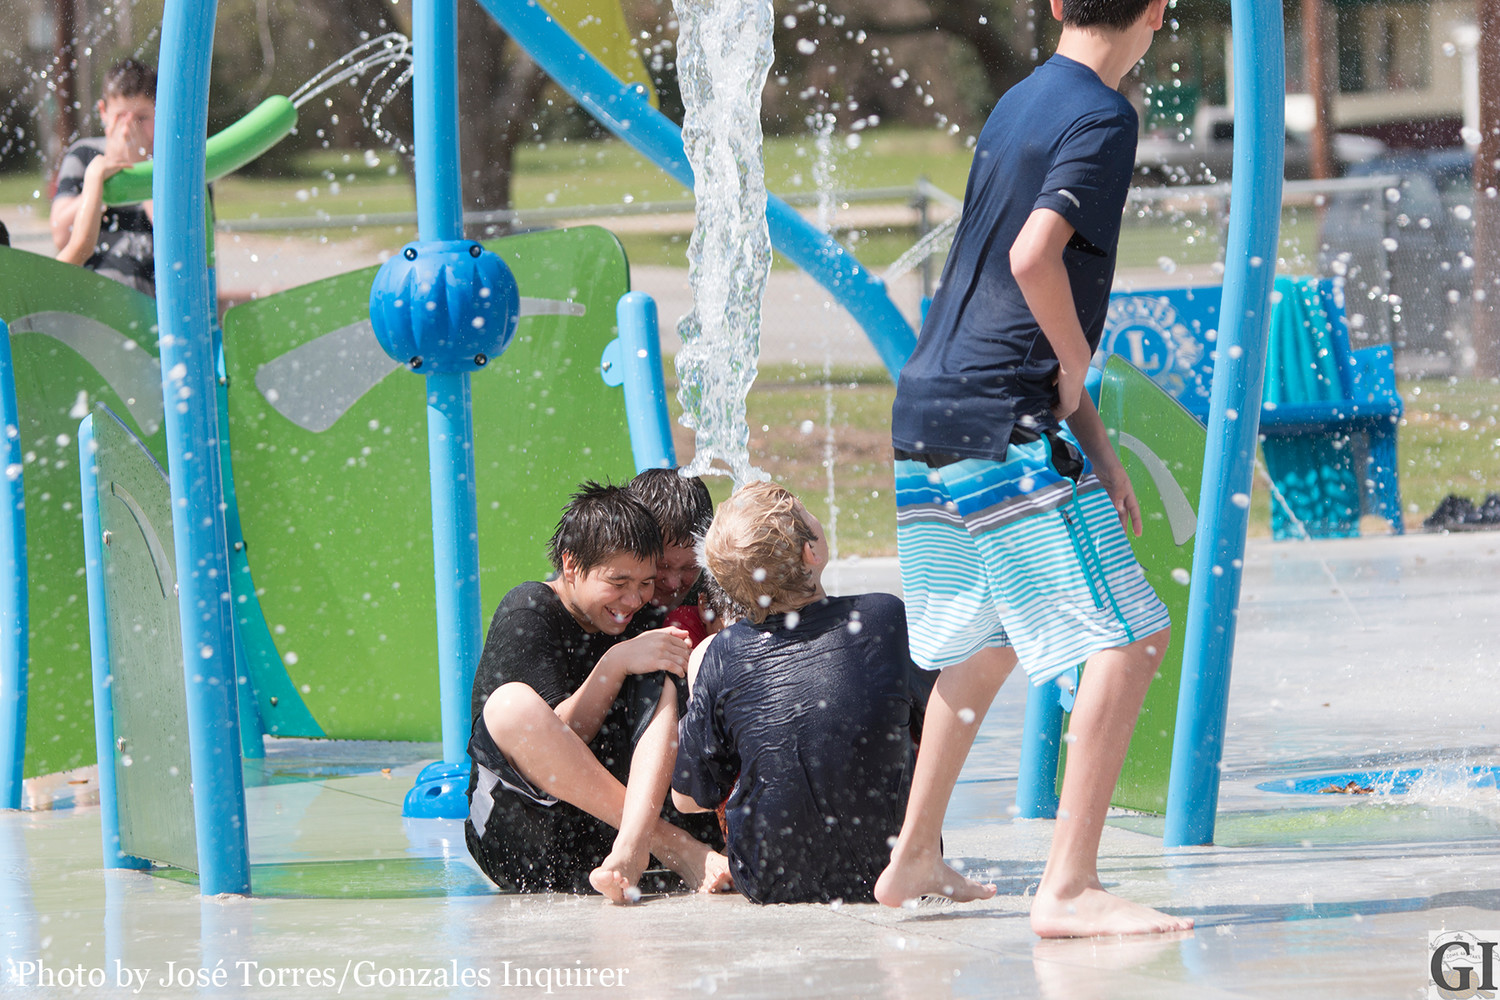 Water comes crashing down Gonzales children taking advantage of the weather Saturday near noon at the splash pad.